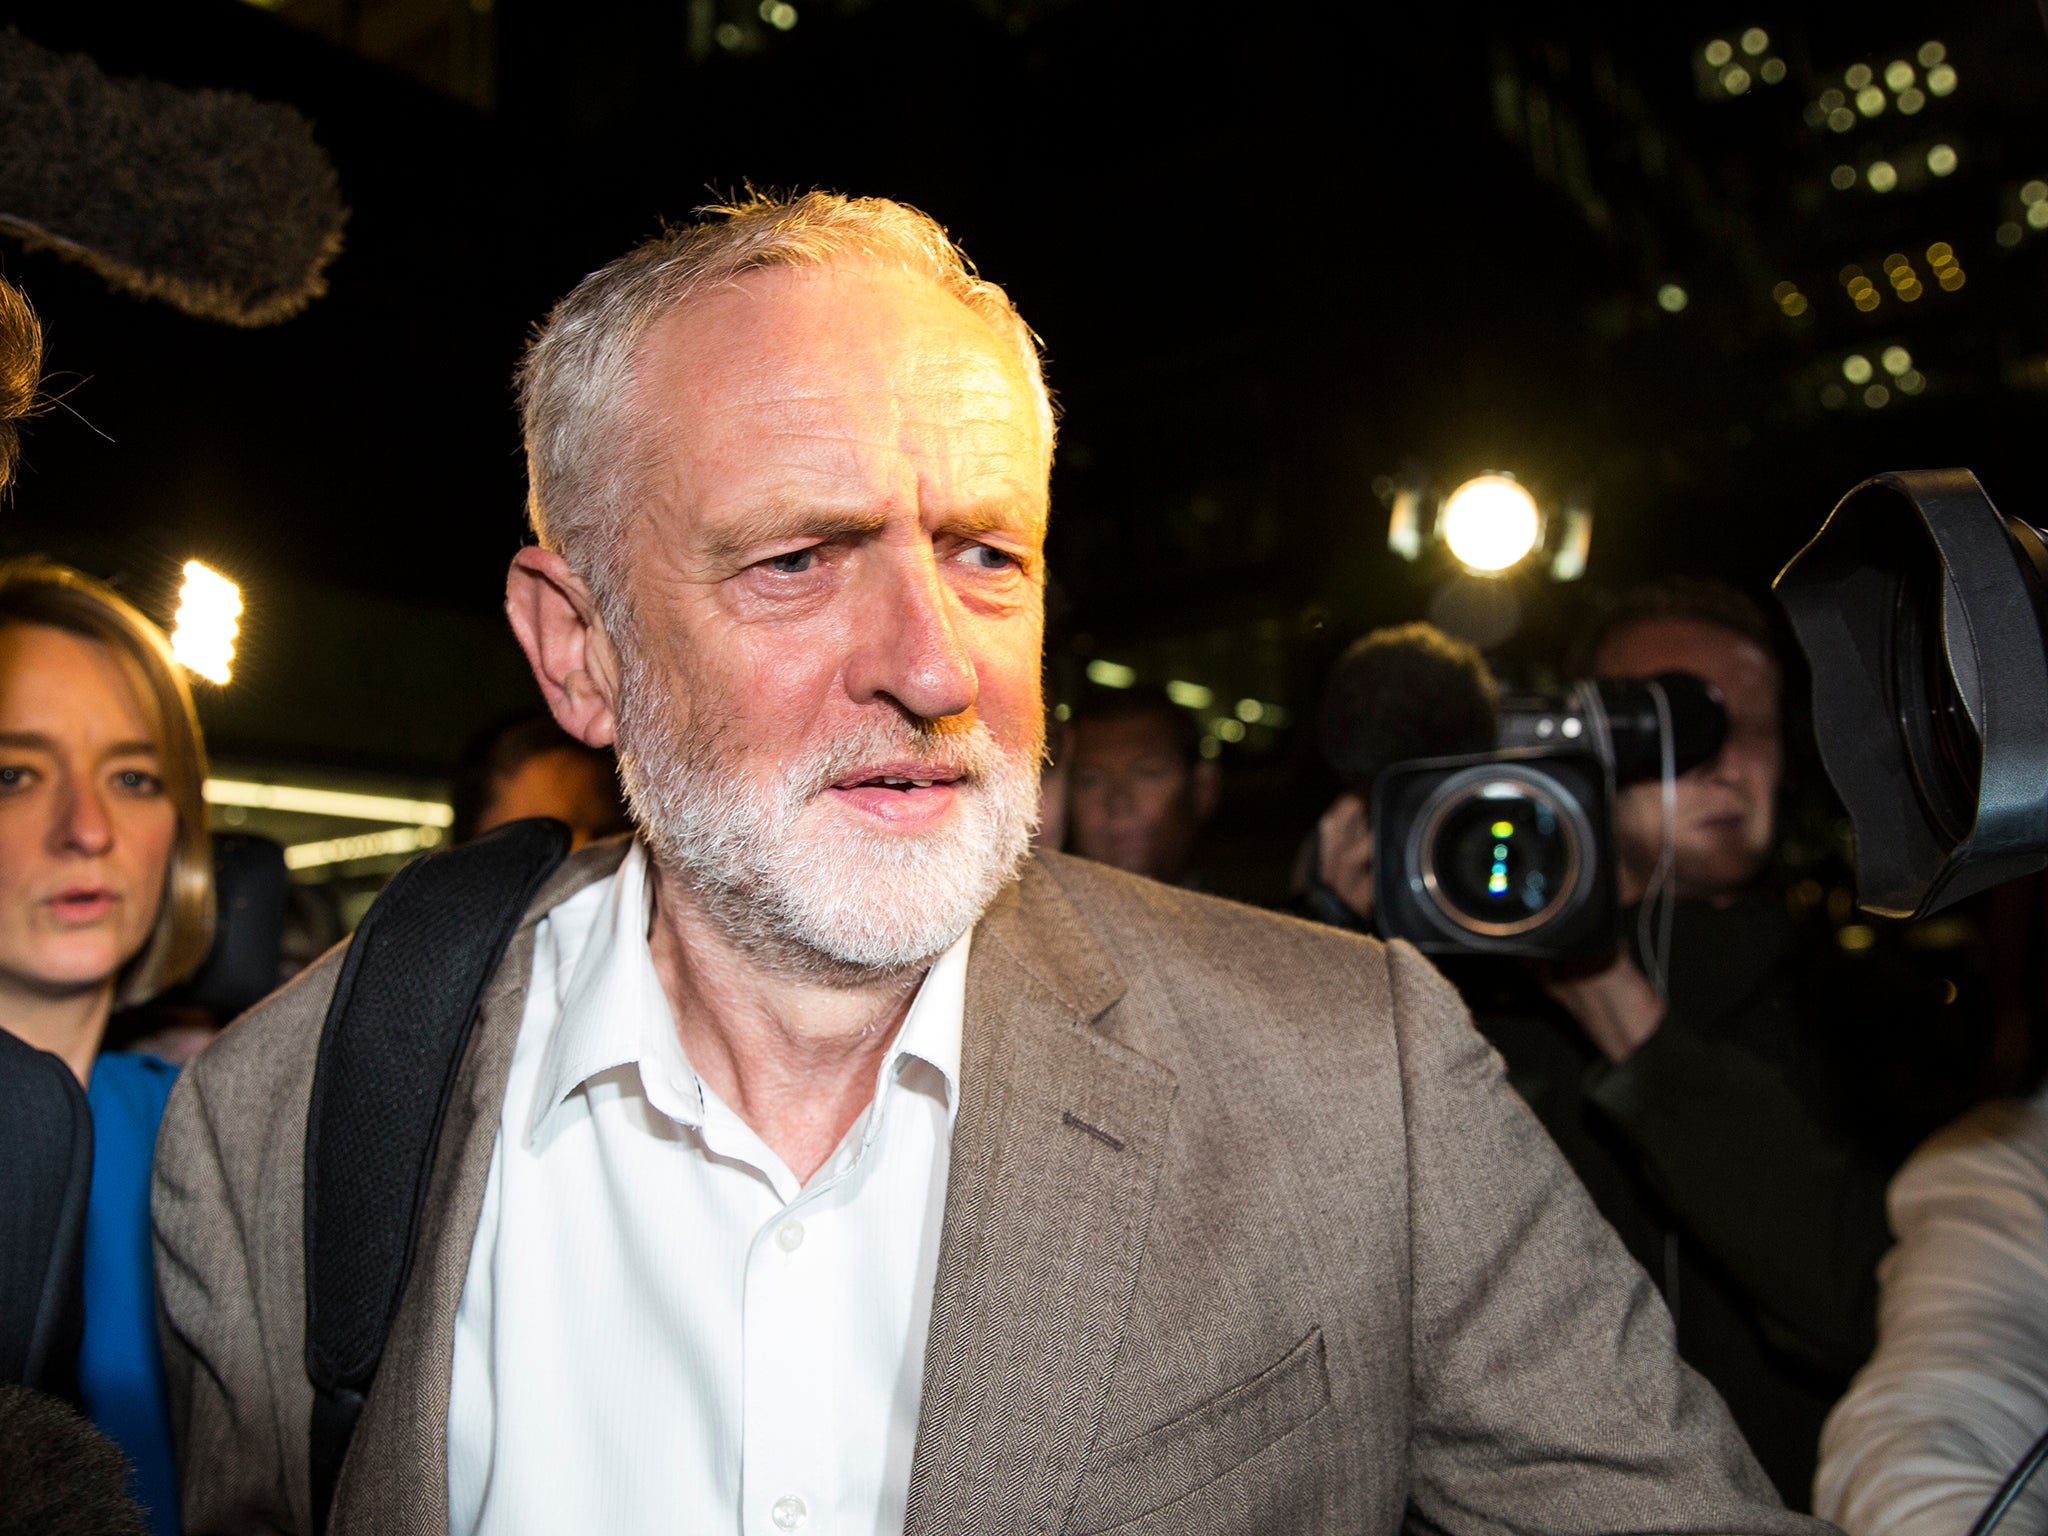 Mr Corbyn is expected to appear more frequently on television and his advisers are said to be working to develop flagship policies to highlight his willingness to lead a revolt against vested interests